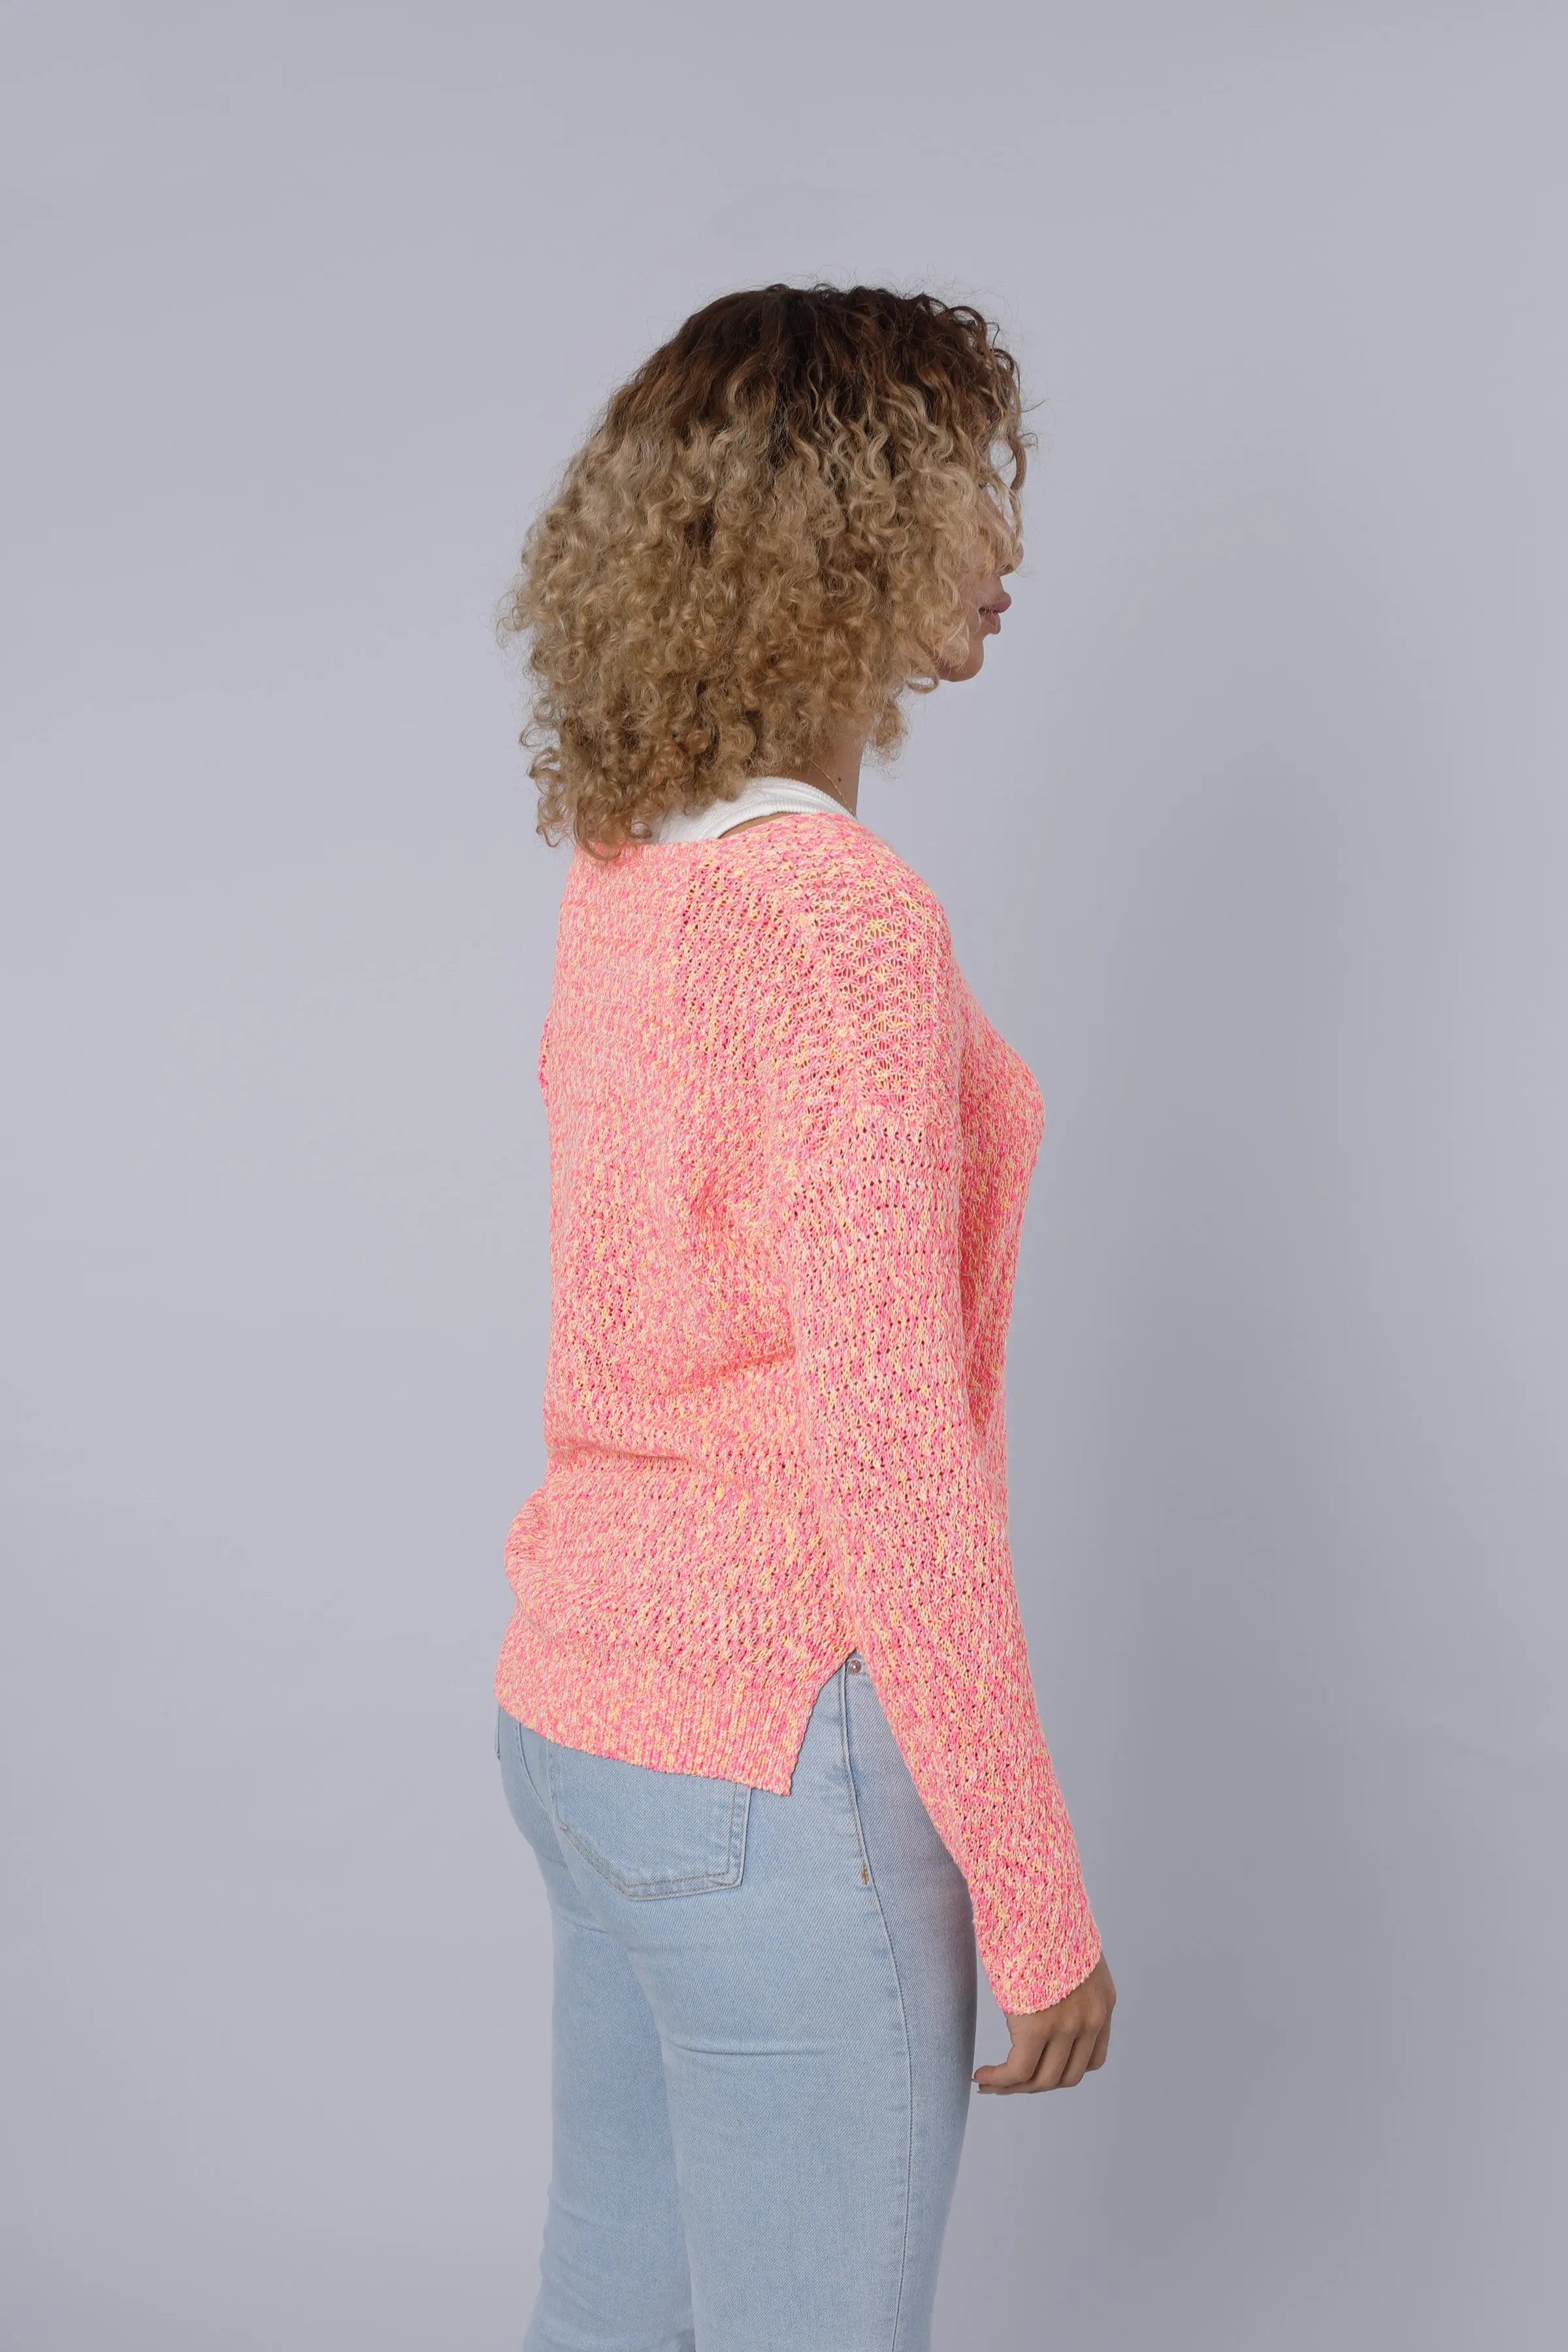 Knitted sweater pink